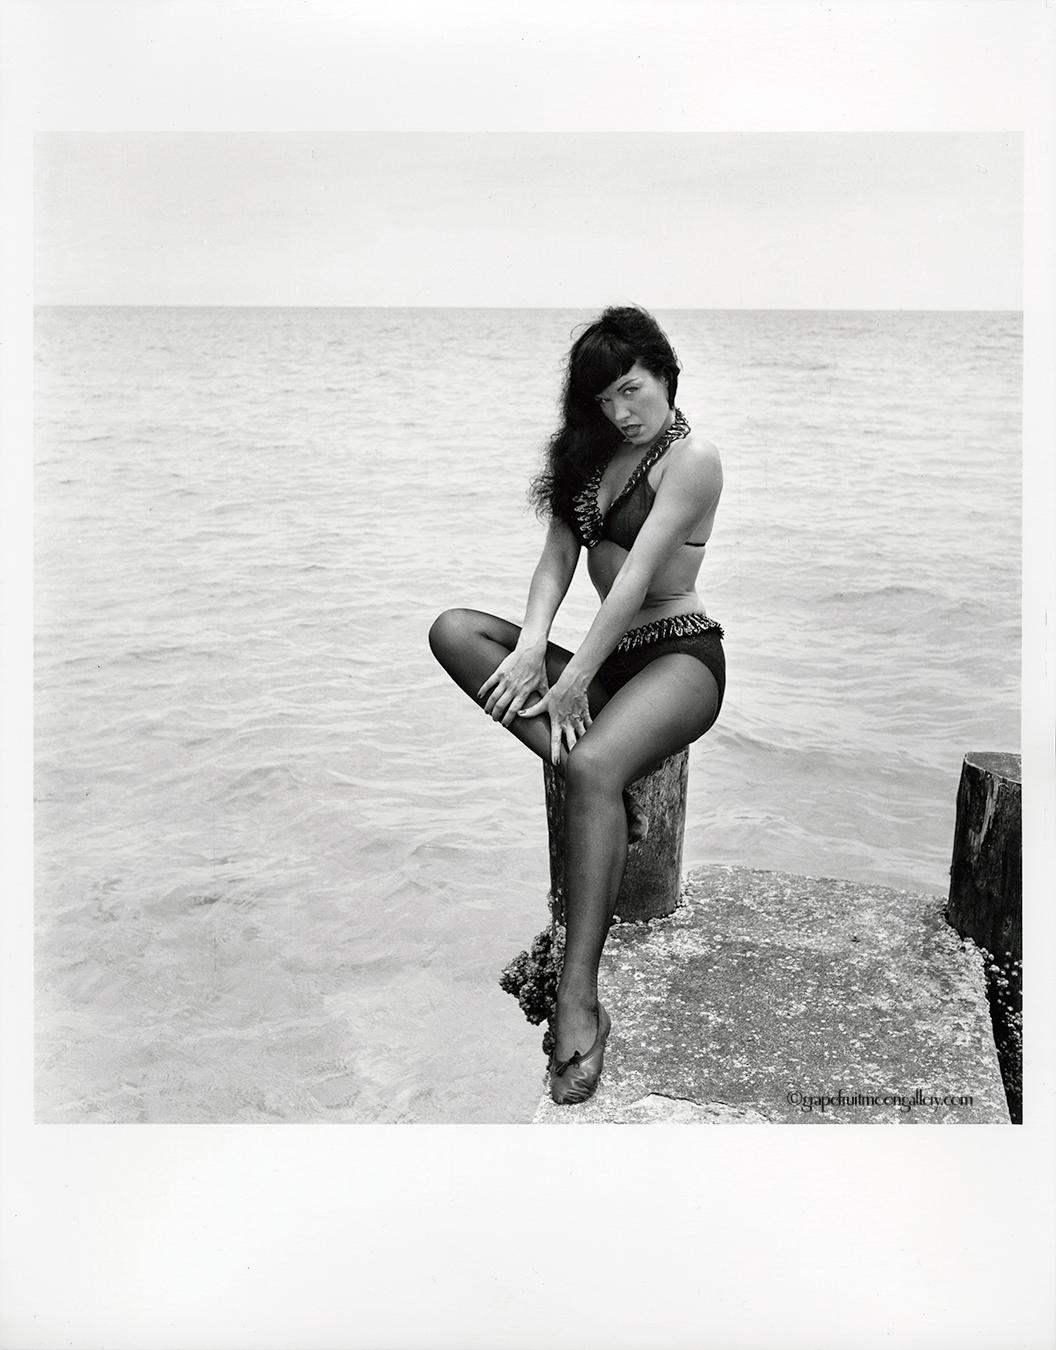 Bettie Page Seated on Pier - Photograph by Bunny Yeager